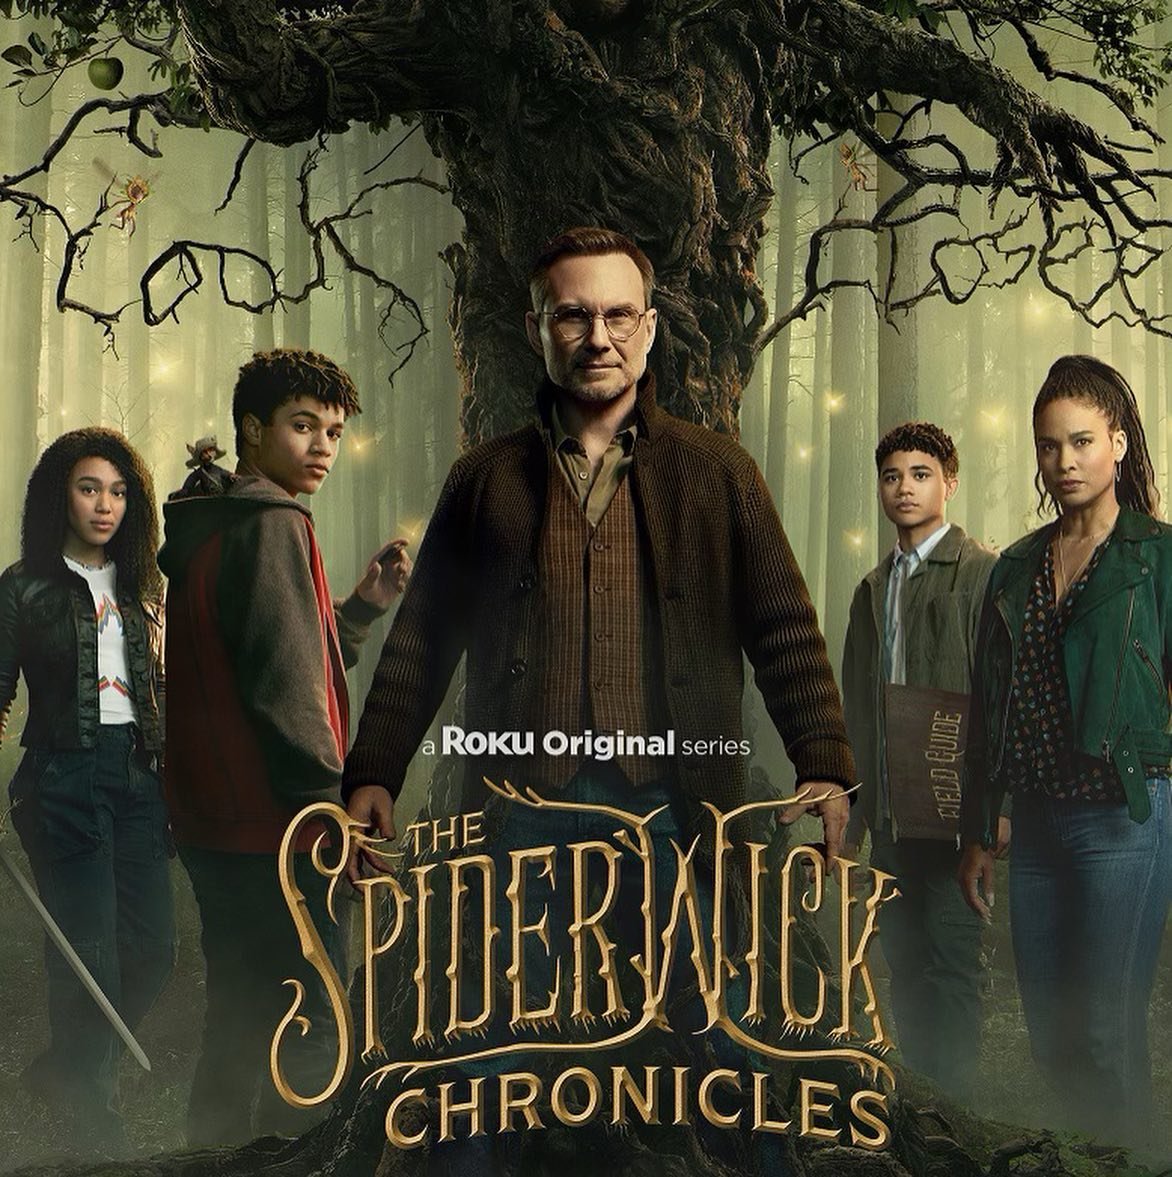 Catch the Spiderwick Chronicles on @therokuchannel today! 

My lil nerd heart was so full to be on the orchestration team for the new Spiderwick adaption with my faves- @niallfest, @alexwilliamscomposer, @dojocubmusic. Can&rsquo;t wait for you all to